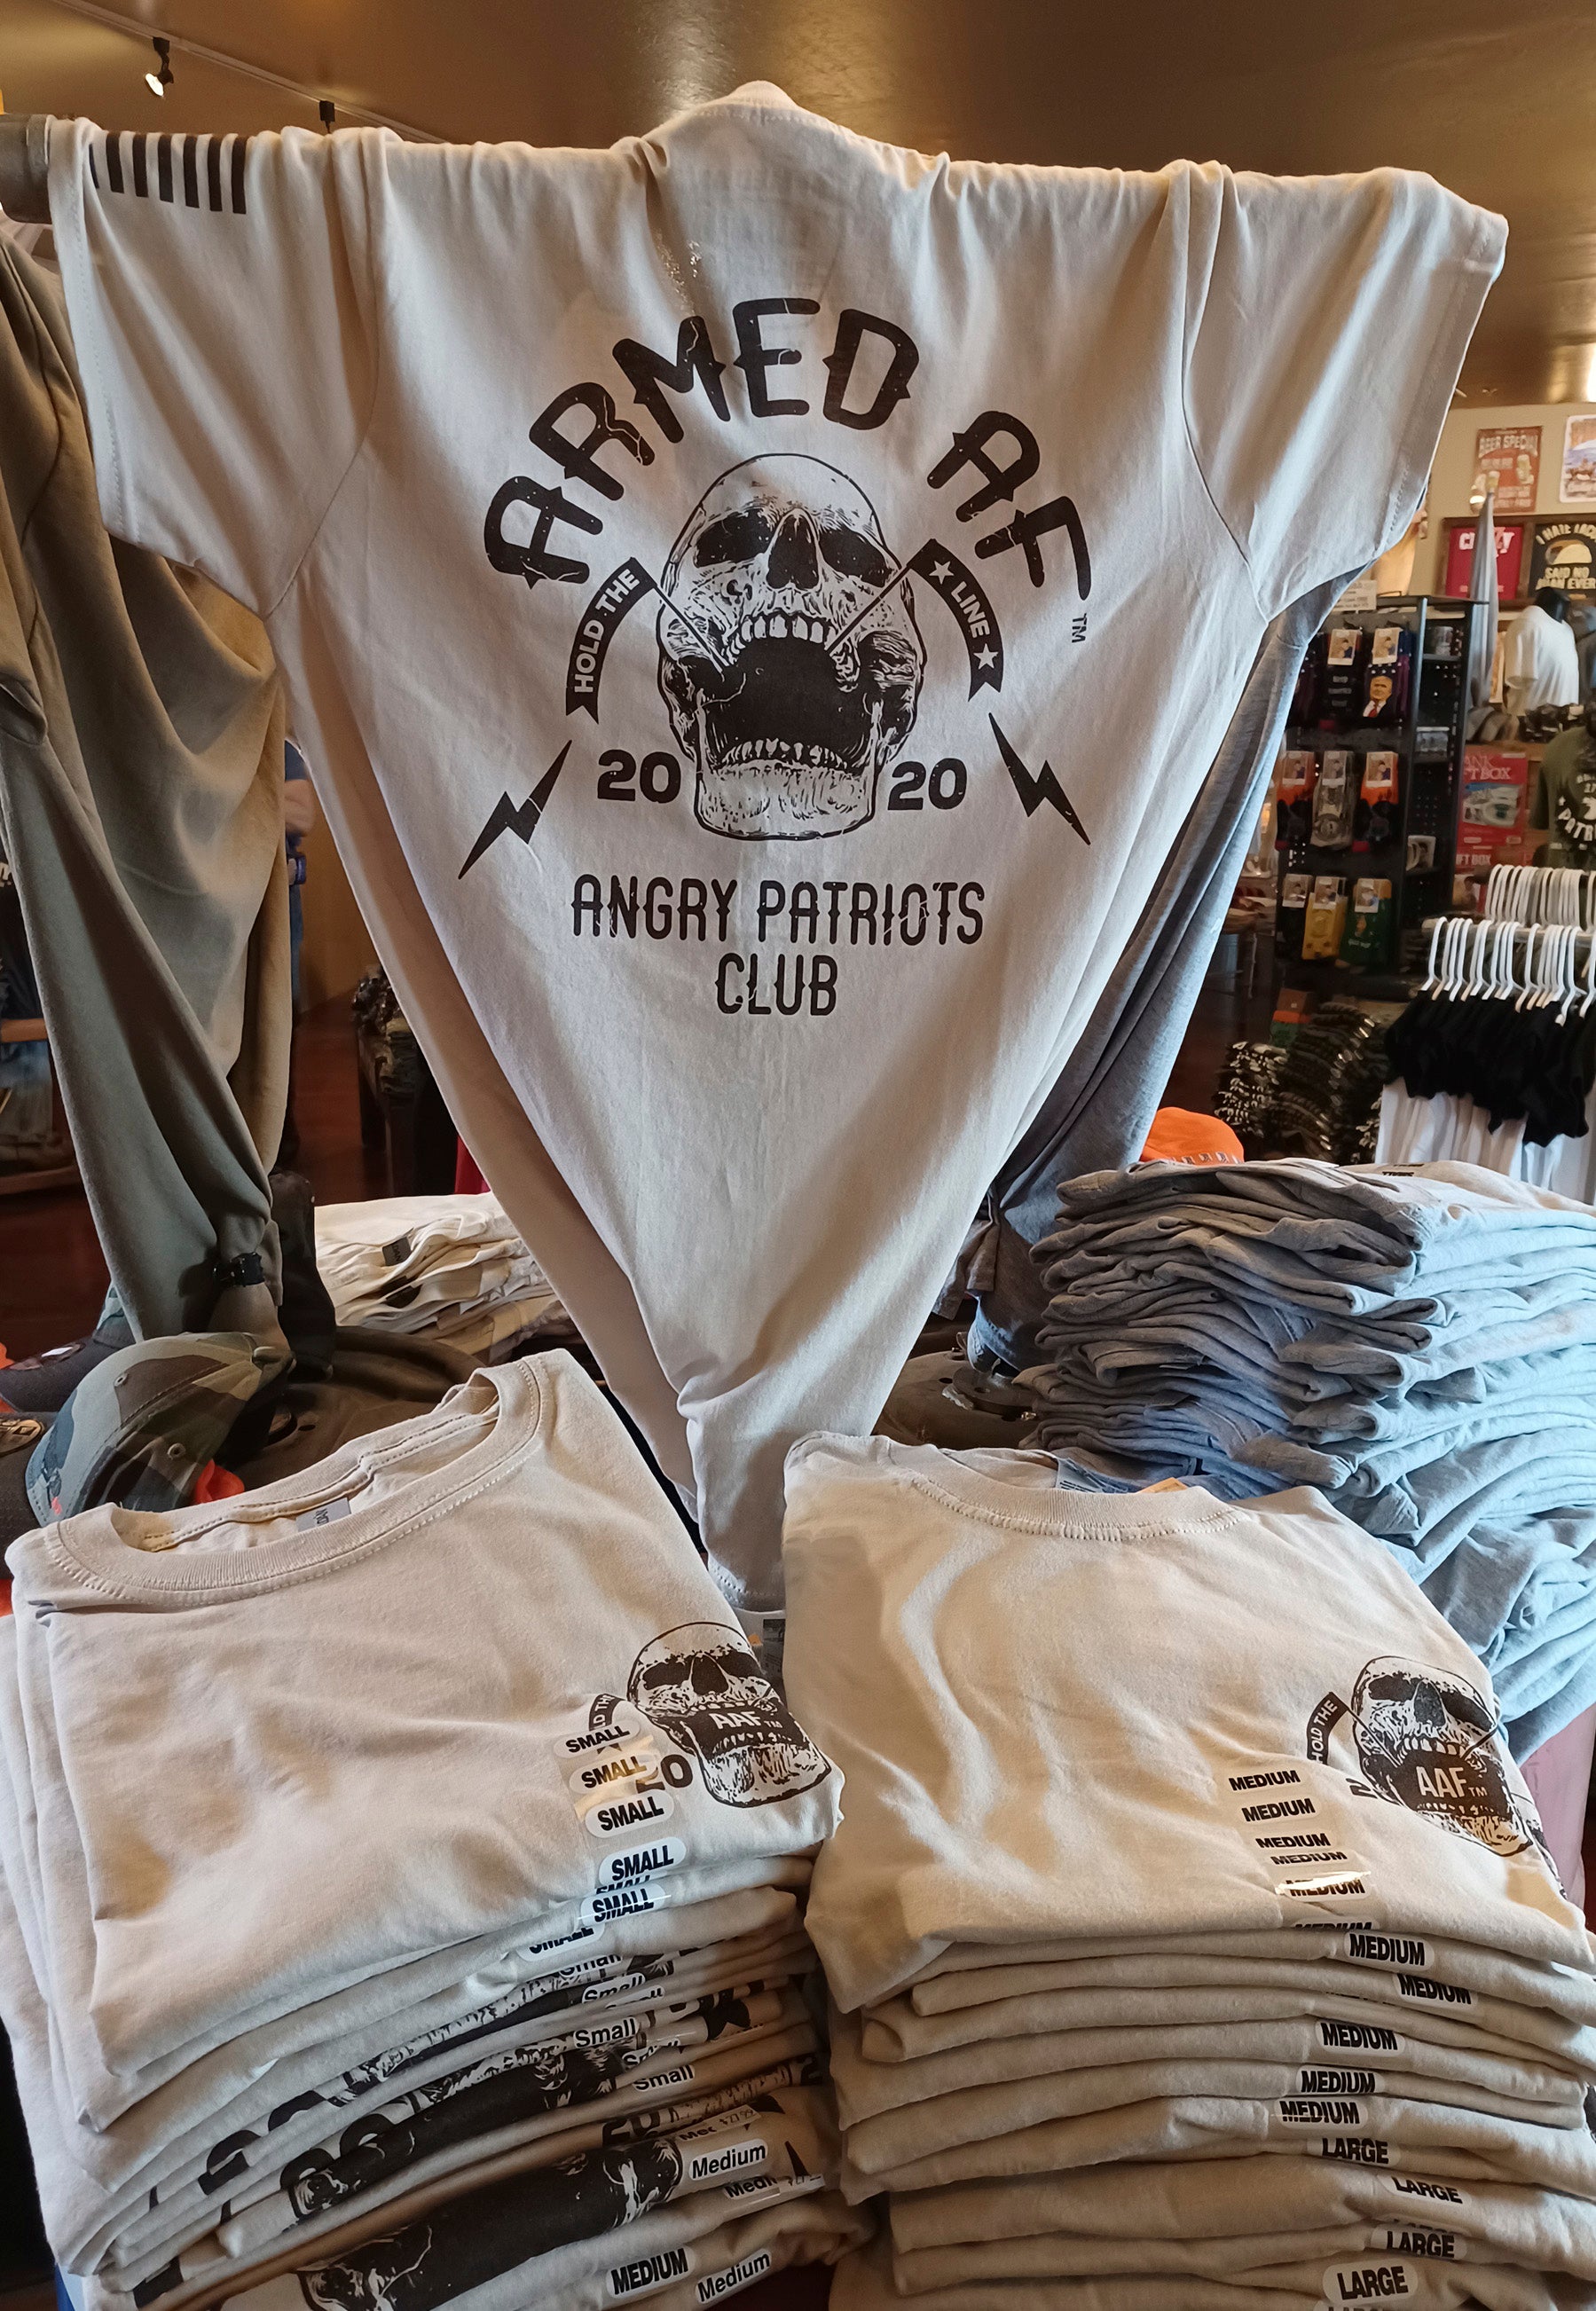 Angry Patriots club t-shirt on display in store